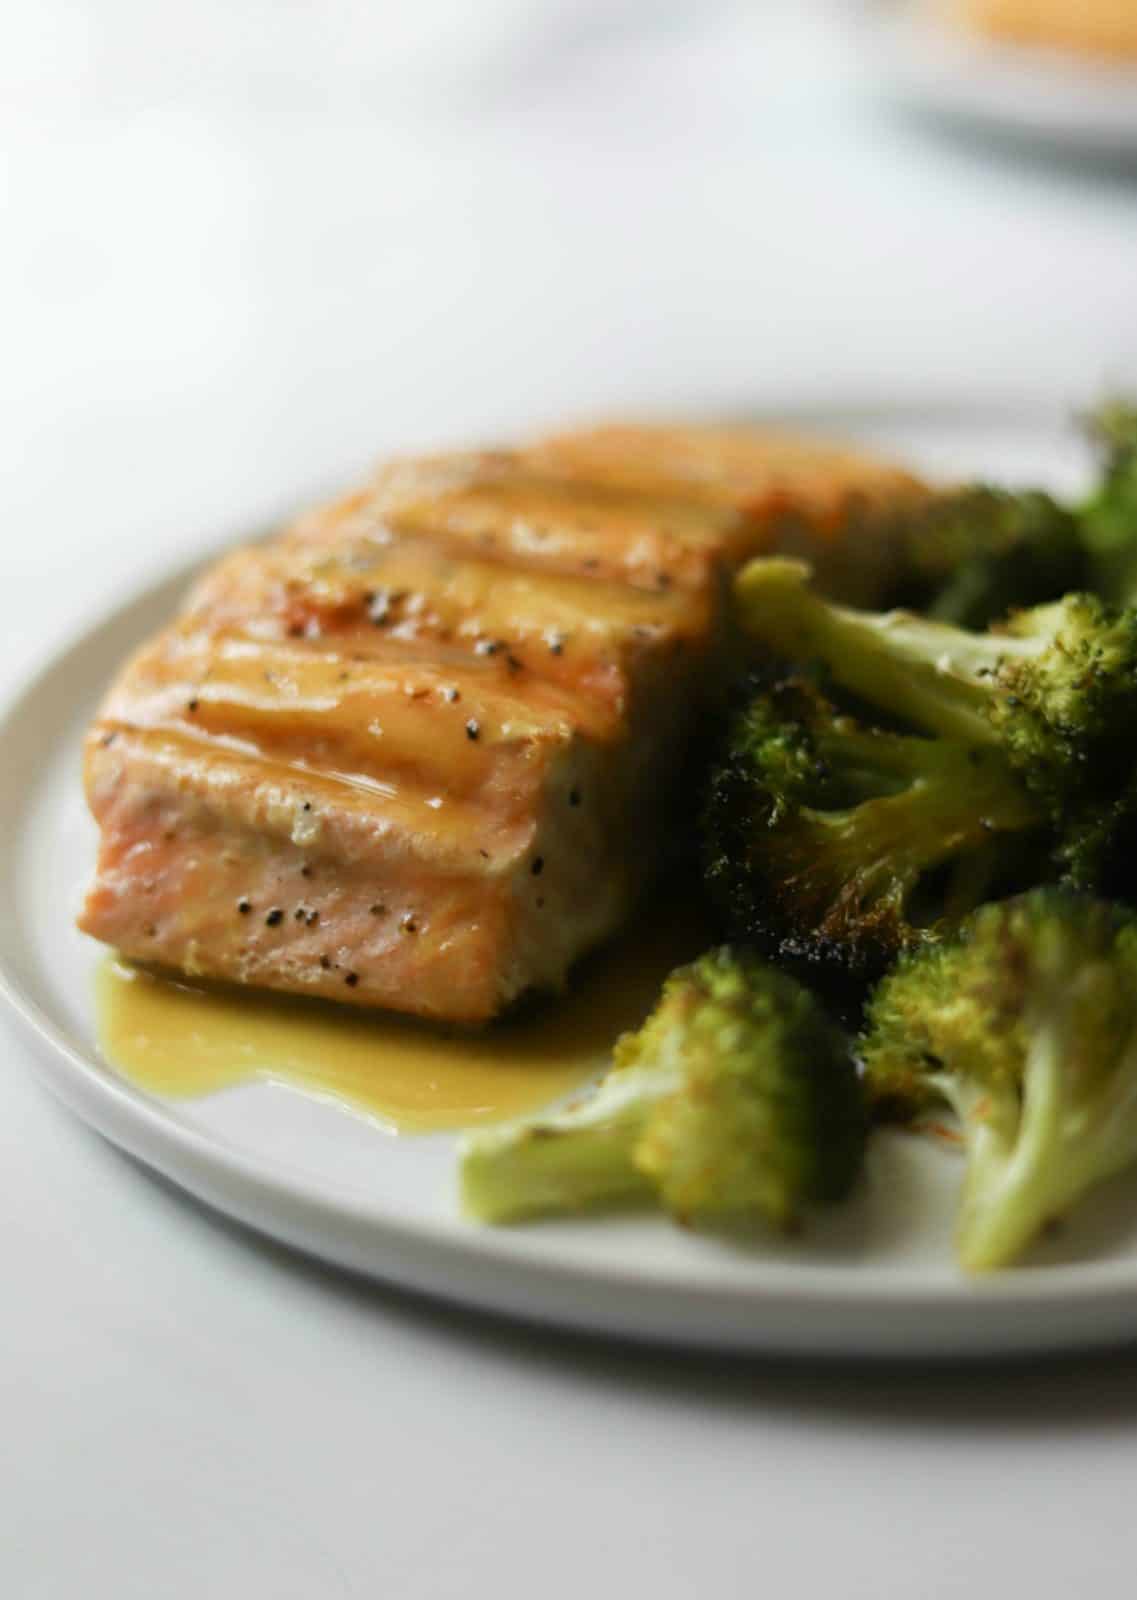 Salmon and broccoli on a white plate